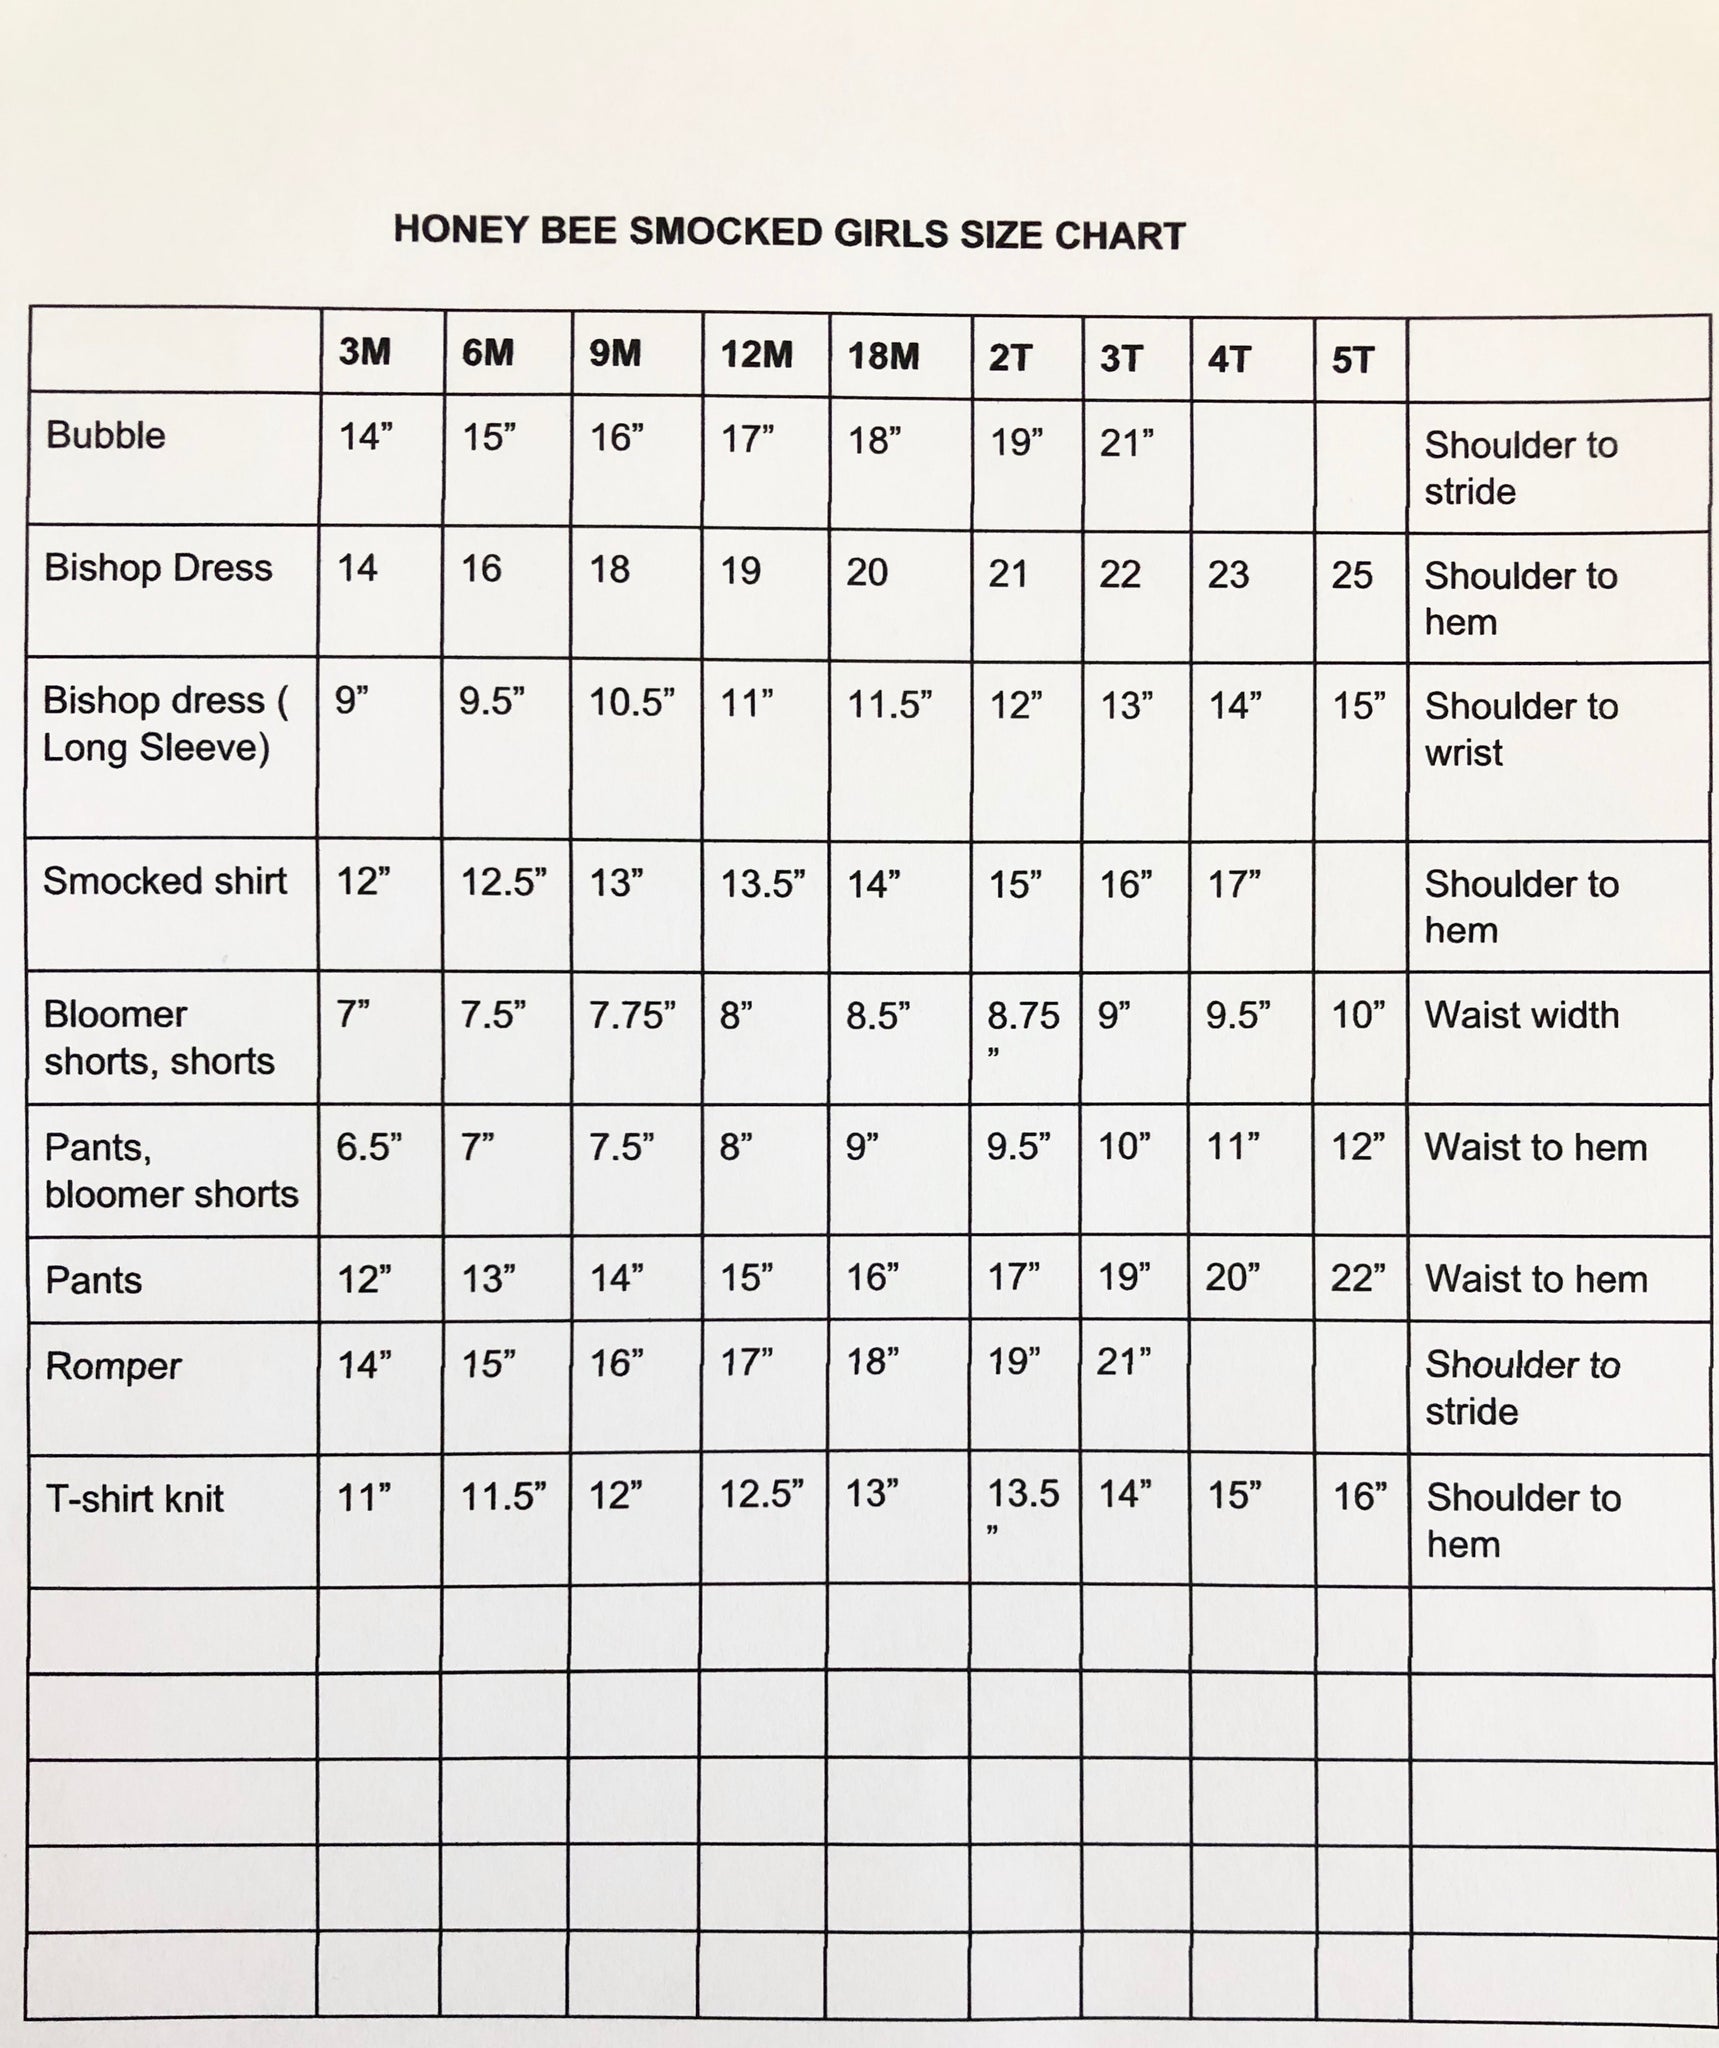 Honey Bee Smocked Boutique girl smocked clothes size chart